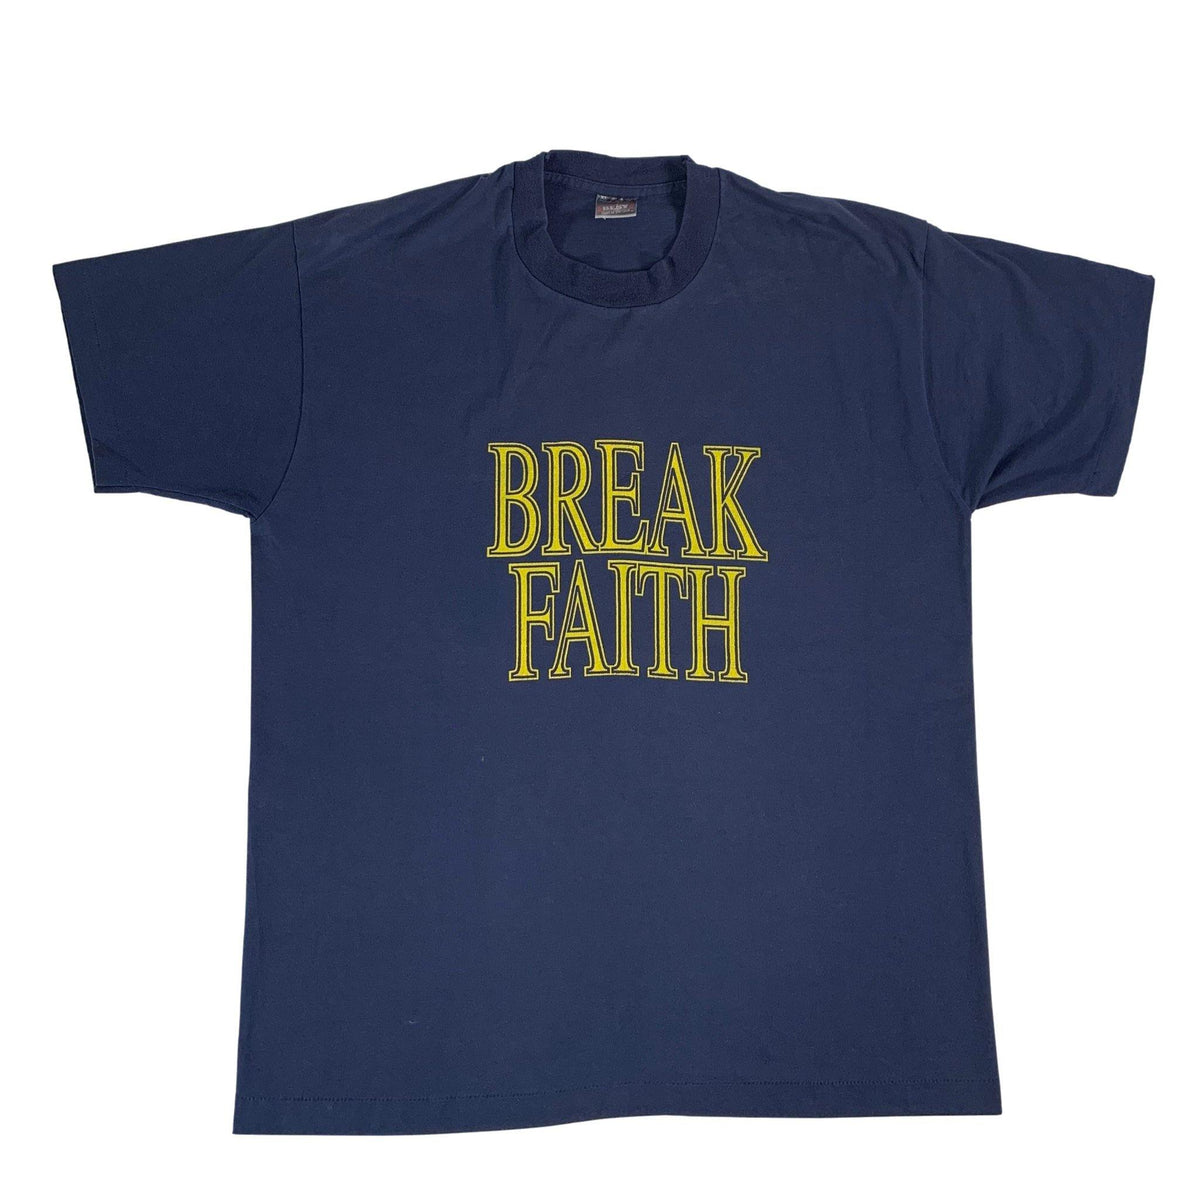 Vintage Break Faith &quot;From Where I Stand&quot; T-Shirt - jointcustodydc